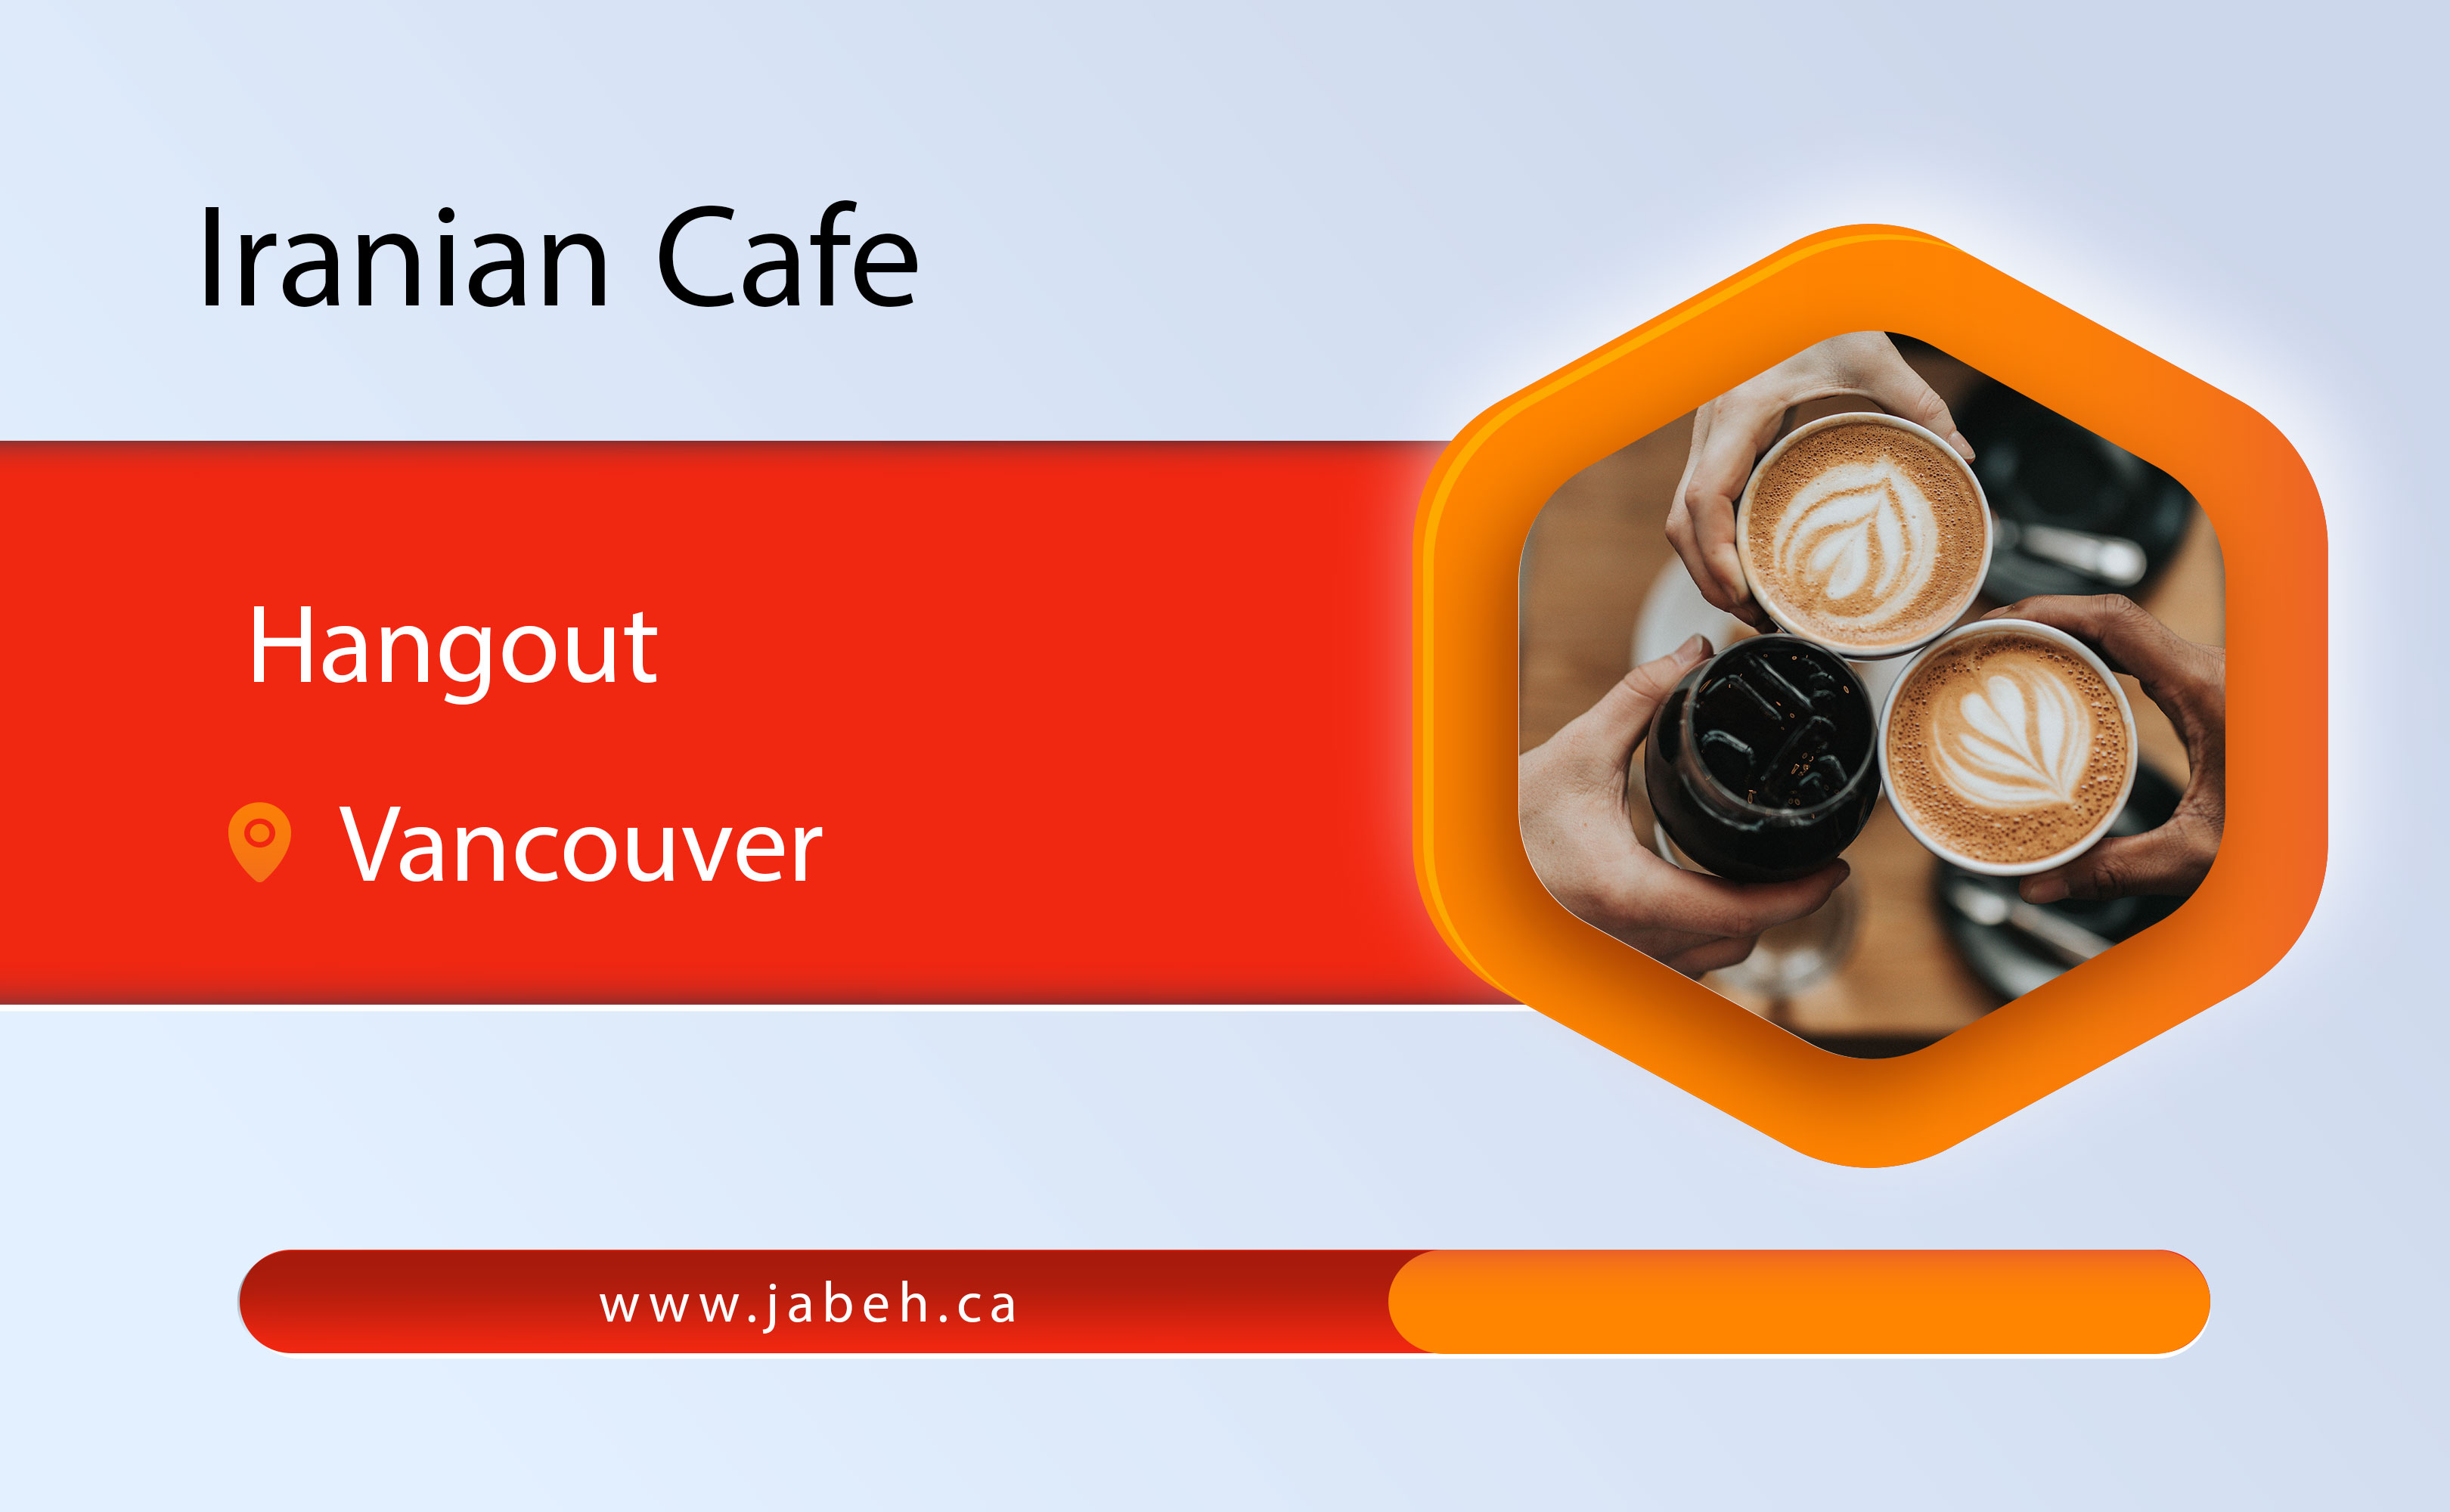 Iranian hangout cafe in Vancouver